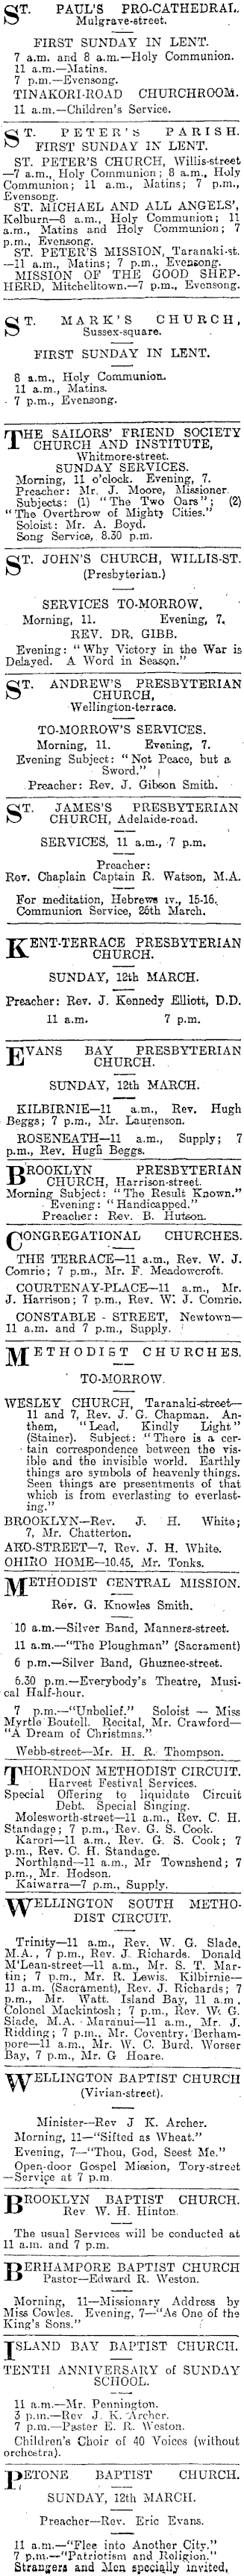 Papers Past Newspapers Evening Post 11 March 1916 Page 3 Advertisements Column 5